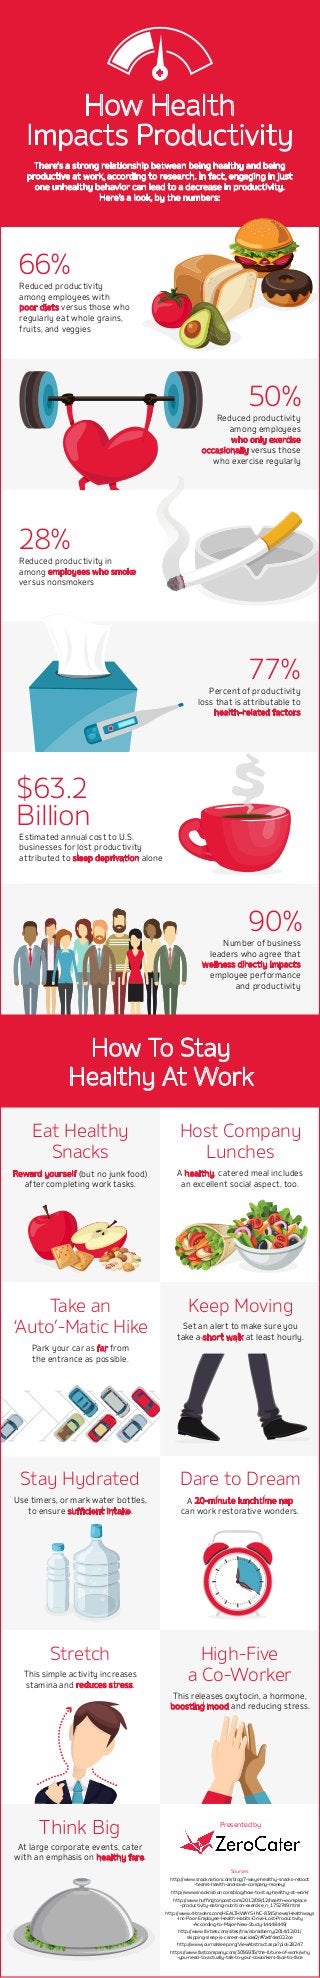 There’s a strong relationship between being healthy and being
productive at work, according to research. In fact, engaging in just
one unhealthy behavior can lead to a decrease in productivity.
Here’s a look, by the numbers:
How Health
Impacts Productivity
Reduced productivity
among employees with
poor diets versus those who
regularly eat whole grains,
fruits, and veggies
66%
50%
90%
Number of business
leaders who agree that
wellness directly impacts
employee performance
and productivity
77%
Percent of productivity
loss that is attributable to
health-related factors
28%
Reduced productivity in
among employees who smoke
versus nonsmokers
Stay Hydrated
Use timers, or mark water bottles,
to ensure sufficient intake.
Estimated annual cost to U.S.
businesses for lost productivity
attributed to sleep deprivation alone
$63.2
Billion
How To Stay
Healthy At Work
Dare to Dream
A 20-minute lunchtime nap
can work restorative wonders.
Stretch High-Five
a Co-WorkerThis simple activity increases
stamina and reduces stress.
This releases oxytocin, a hormone,
boosting mood and reducing stress.
Think Big
At large corporate events, cater
with an emphasis on healthy fare.
Presented by
Reduced productivity
among employees
who only exercise
occasionally versus those
who exercise regularly
Eat Healthy
Snacks
Reward yourself (but no junk food)
after completing work tasks.
Take an
‘Auto’-Matic Hike
Park your car as far from
the entrance as possible.
Host Company
Lunches
A healthy, catered meal includes
an excellent social aspect, too.
Keep Moving
Set an alert to make sure you
take a short walk at least hourly.
Sources:
http://www.snacknation.com/blog/7-ways-healthy-snacks-reboot
-teams-health-and-save-company-money/
http://www.snacknation.com/blog/how-to-stay-healthy-at-work/
http://www.huffingtonpost.com/2012/08/12/health-workplace
-productivity-eating-nutrition-exercise_n_1752749.html
http://www.4-traders.com/HEALTHWAYS-INC-8345/news/Healthways
-Inc-Poor-Employee-Health-Habits-Drive-Lost-Productivity
-According-to-Major-New-Study-14448449/
http://www.forbes.com/sites/travisbradberry/2014/12/01/
skipping-sleep-is-career-suicide/2/#7a4f4ec022ce
http://www.journalsleep.org/ViewAbstract.aspx?pid=28247
https://www.fastcompany.com/3036935/the-future-of-work/why
-you-need-to-actually-talk-to-your-coworkers-face-to-face
 